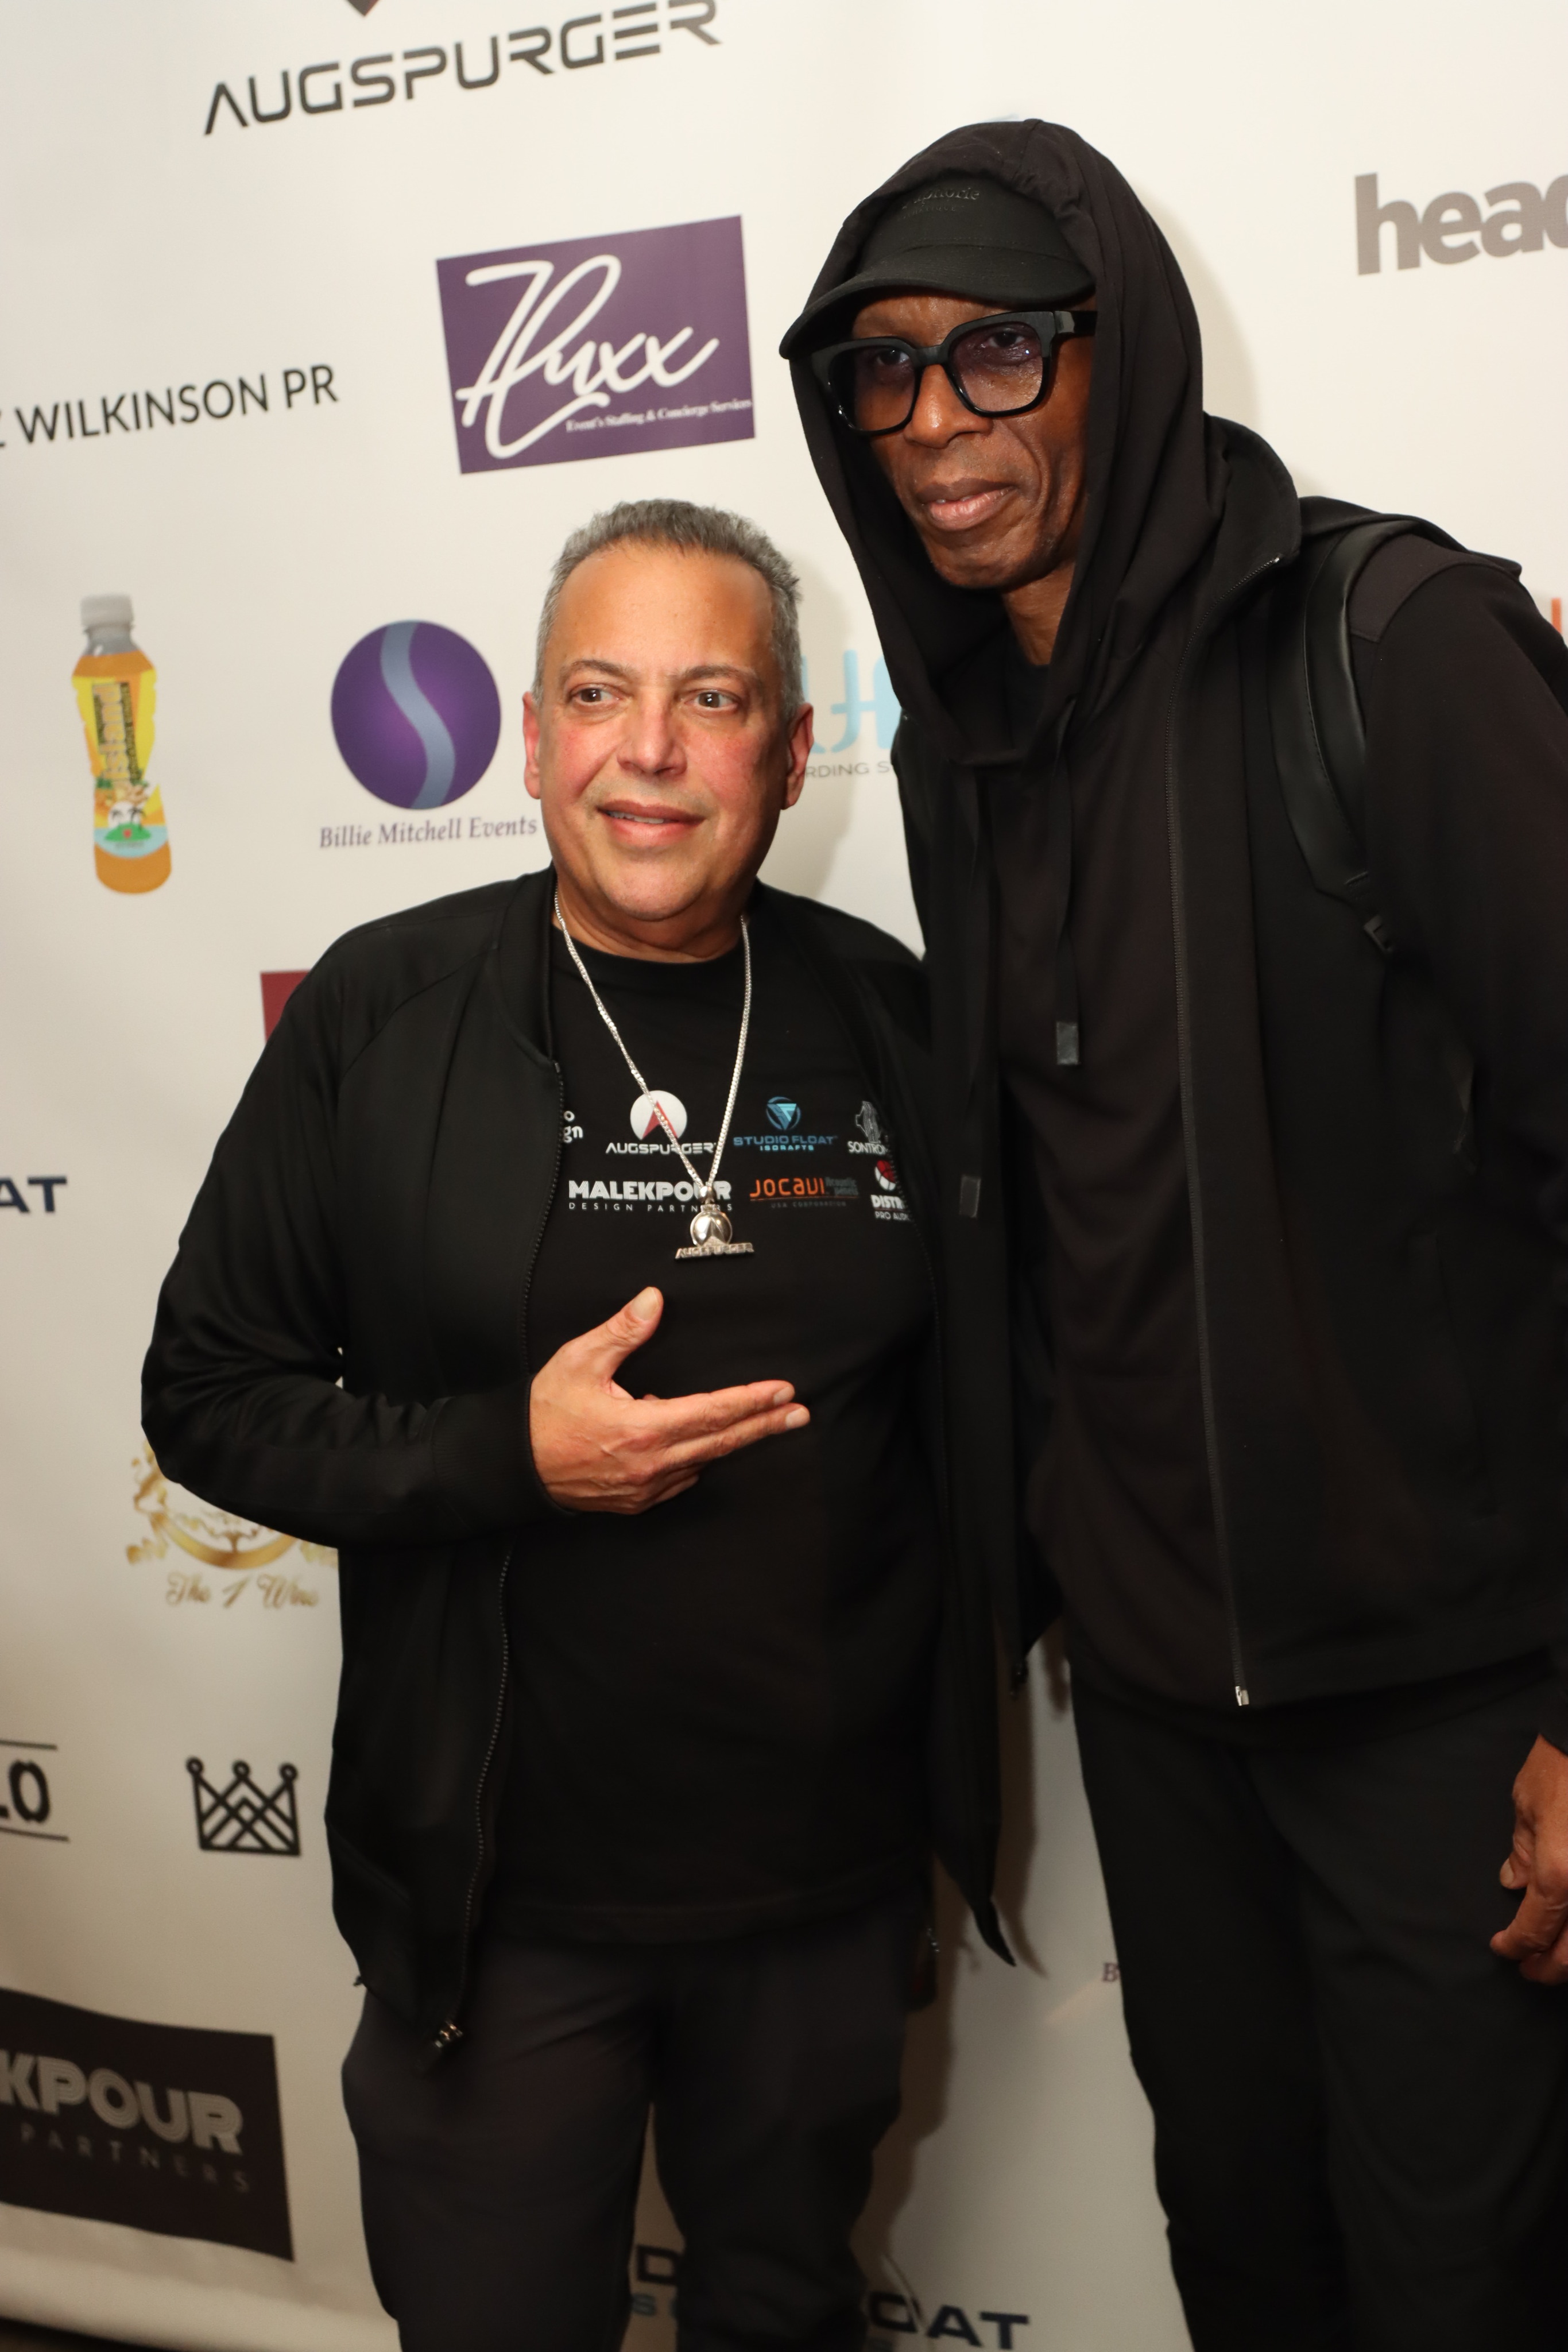 Augspurger® Monitors' Dave Malekpour with Public Enemy founder Hank Shocklee